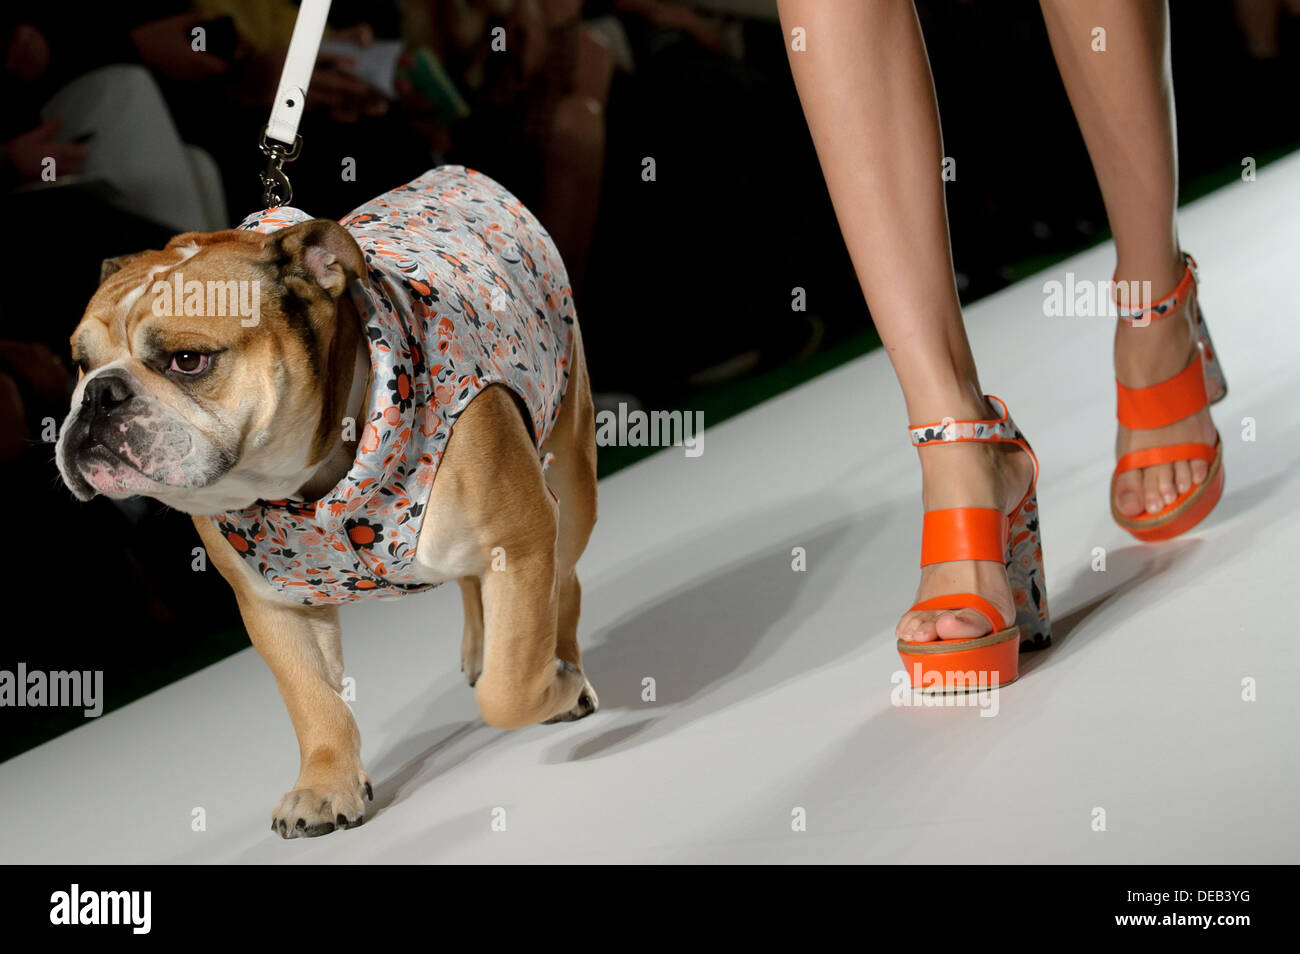 A model wears a design created by Mulberry during London Fashion Week Spring/Summer 2014. Stock Photo